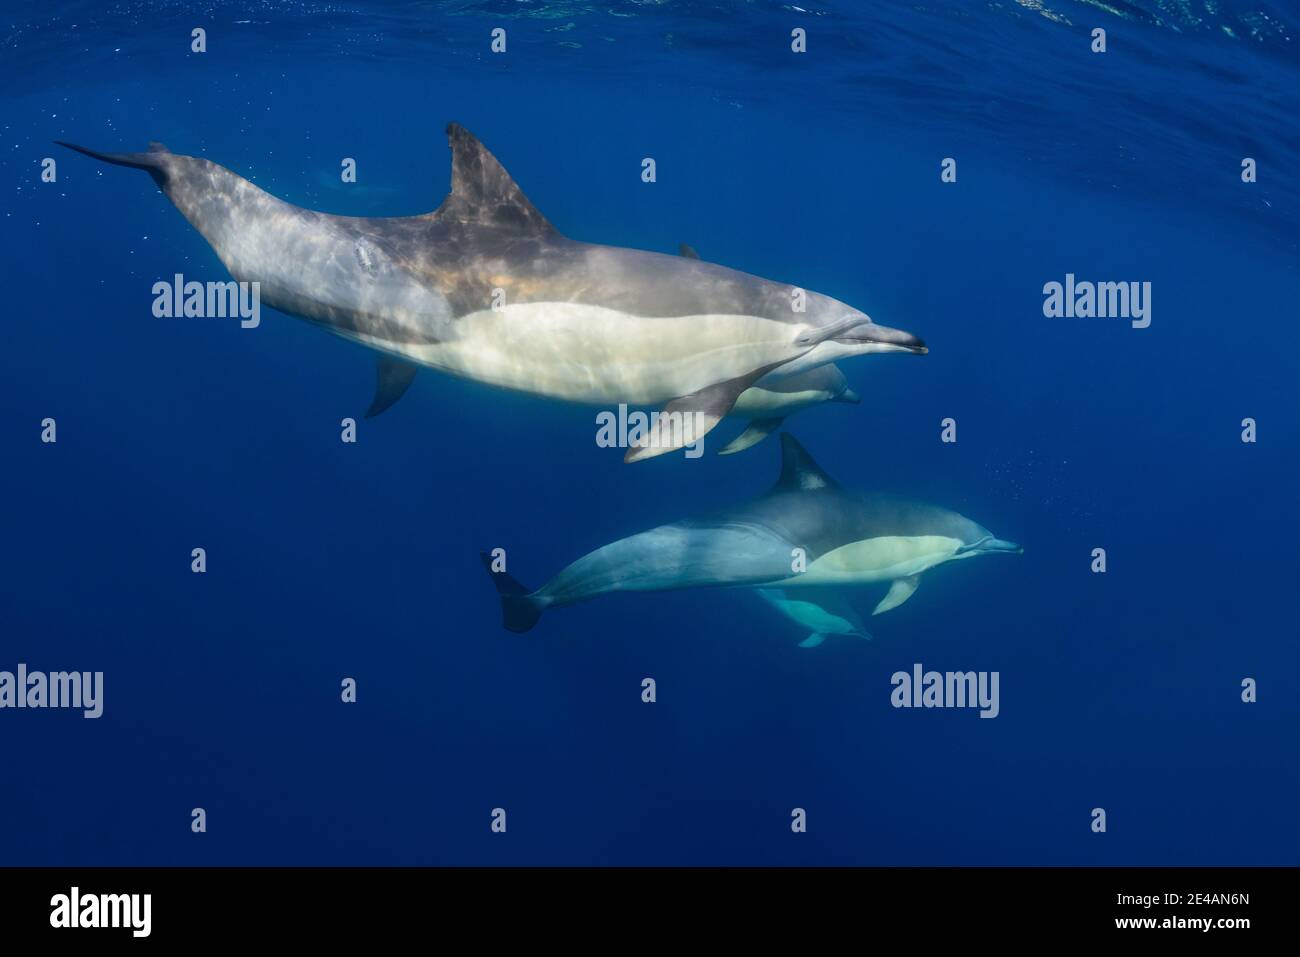 Long-nosed common dolphins (Delphinus capensi), school of dolphins, Port Elizabeth, Algoa Bay, Nelson Mandela Bay, South Africa, Indian Ocean Stock Photo